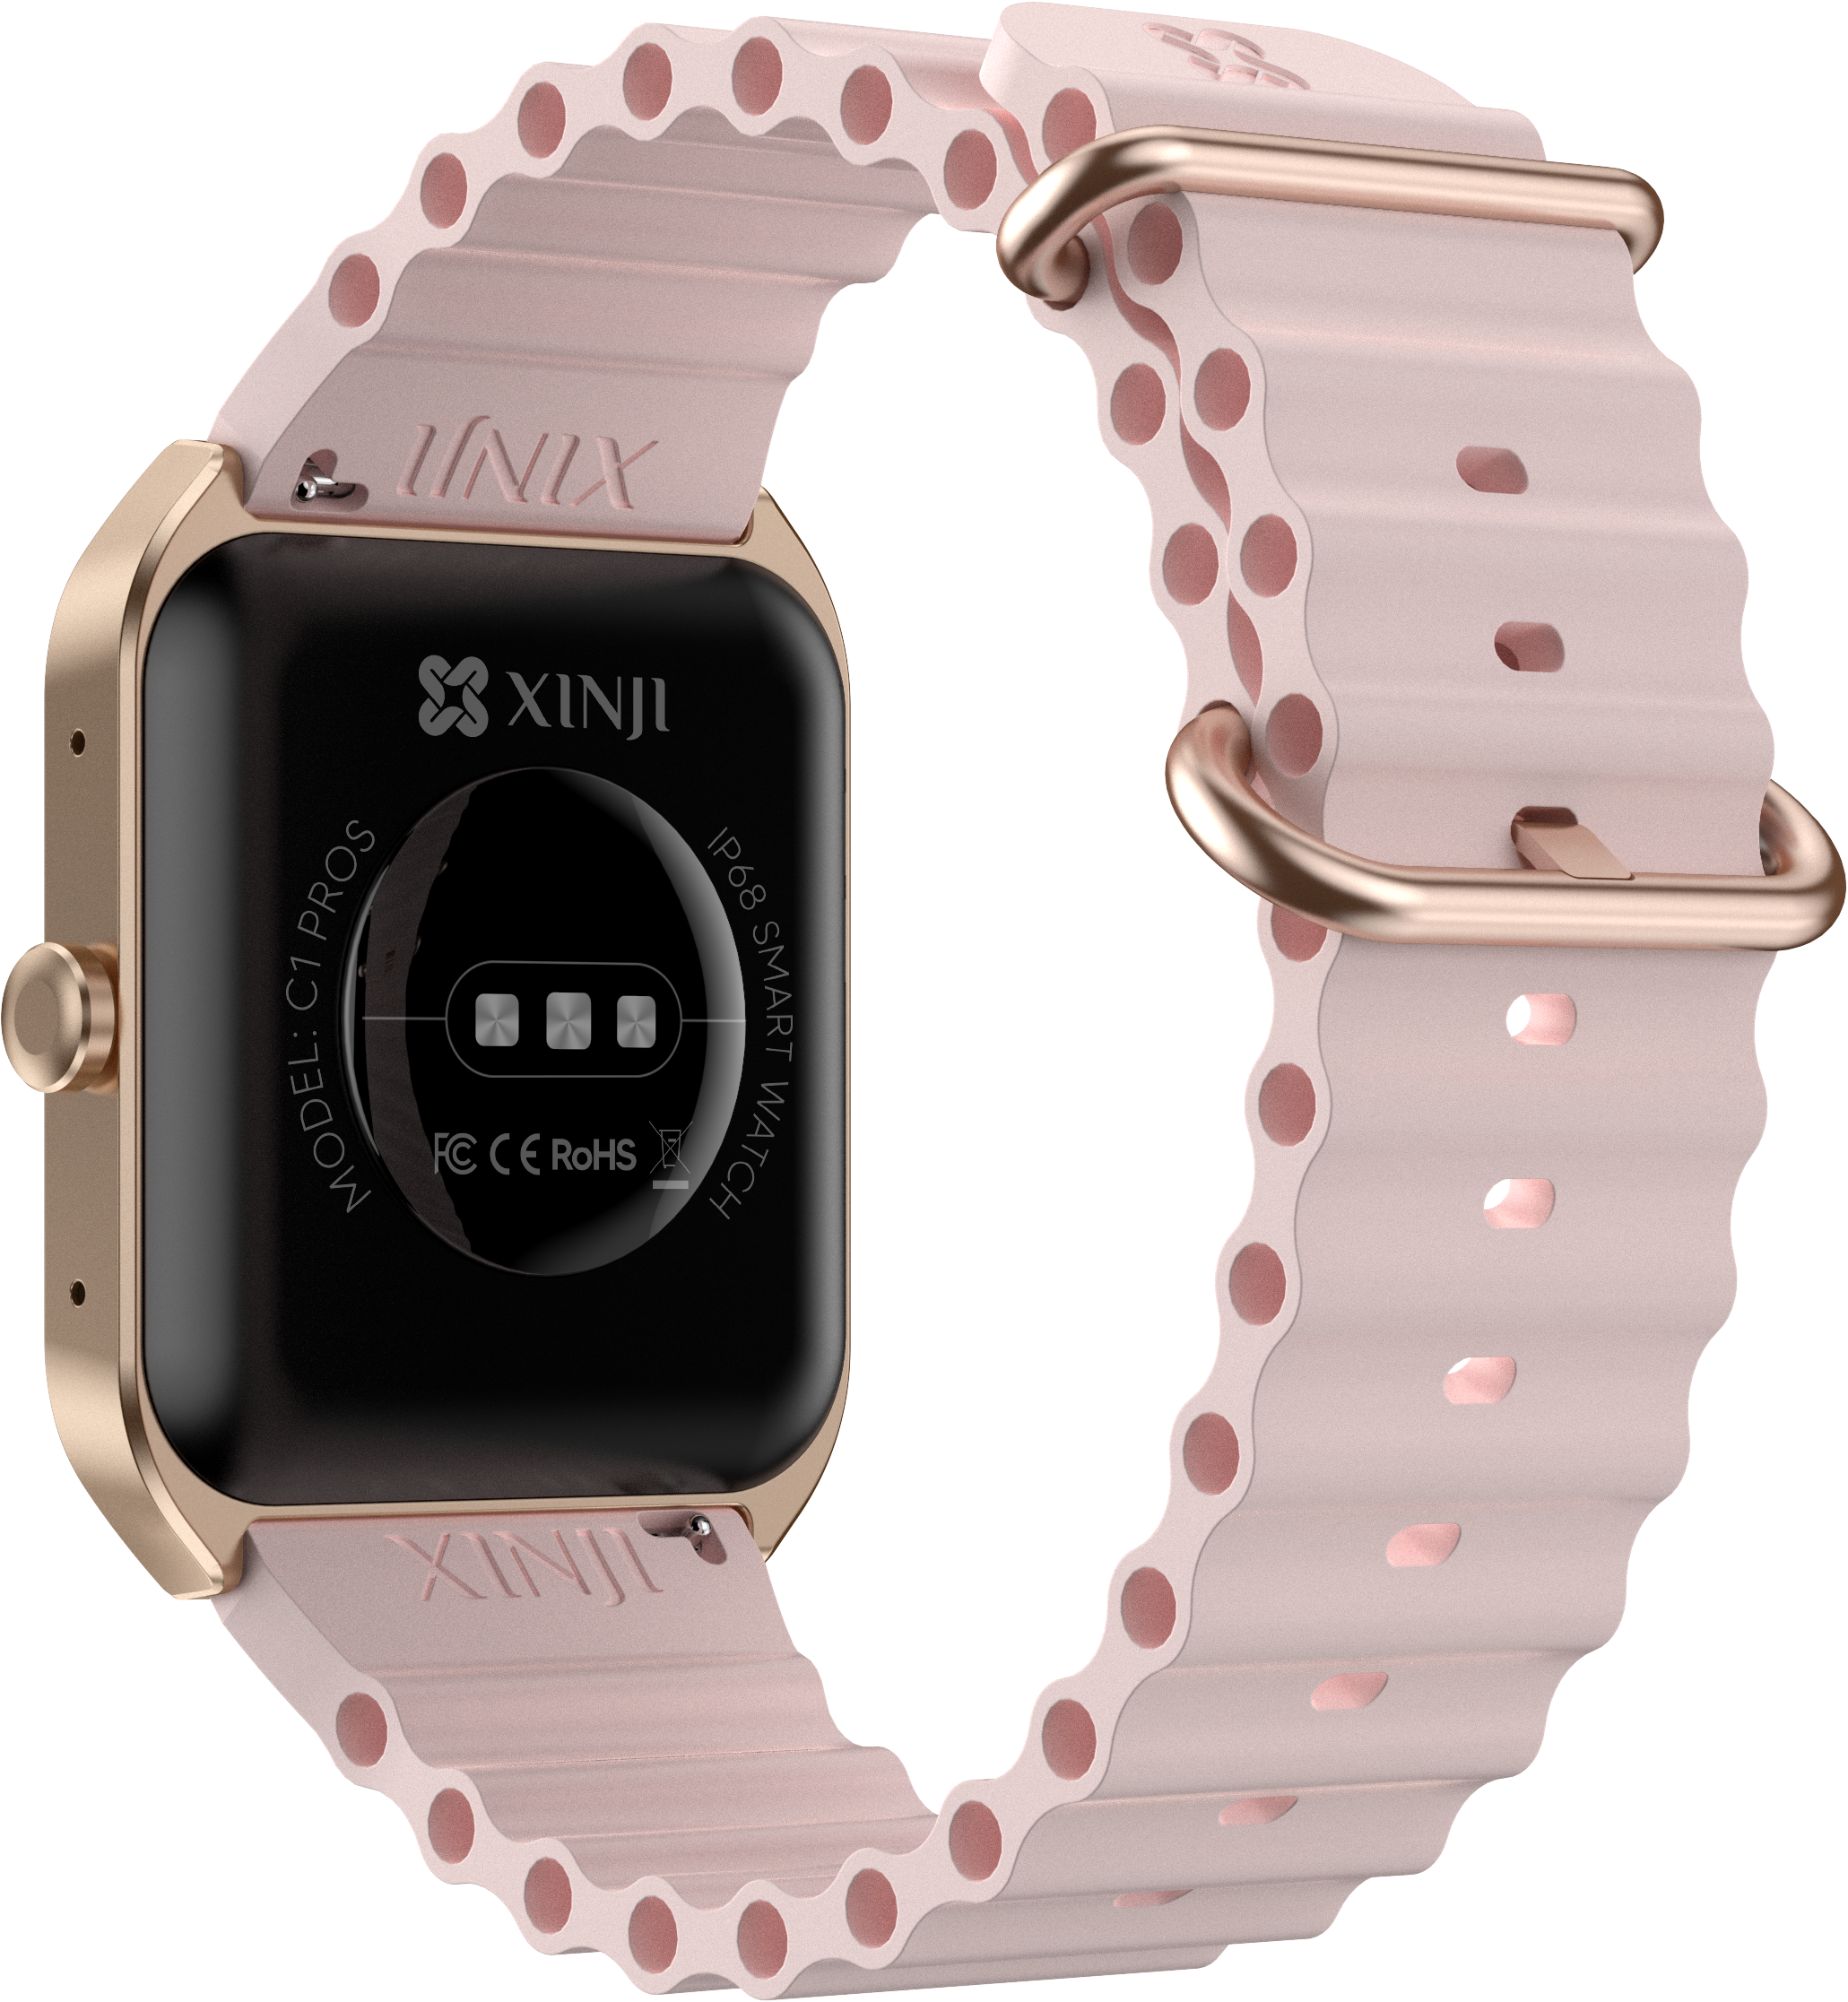 Black Square Unix Series 6 Smart Watch, For Daily at Rs 1450/piece in  Lucknow